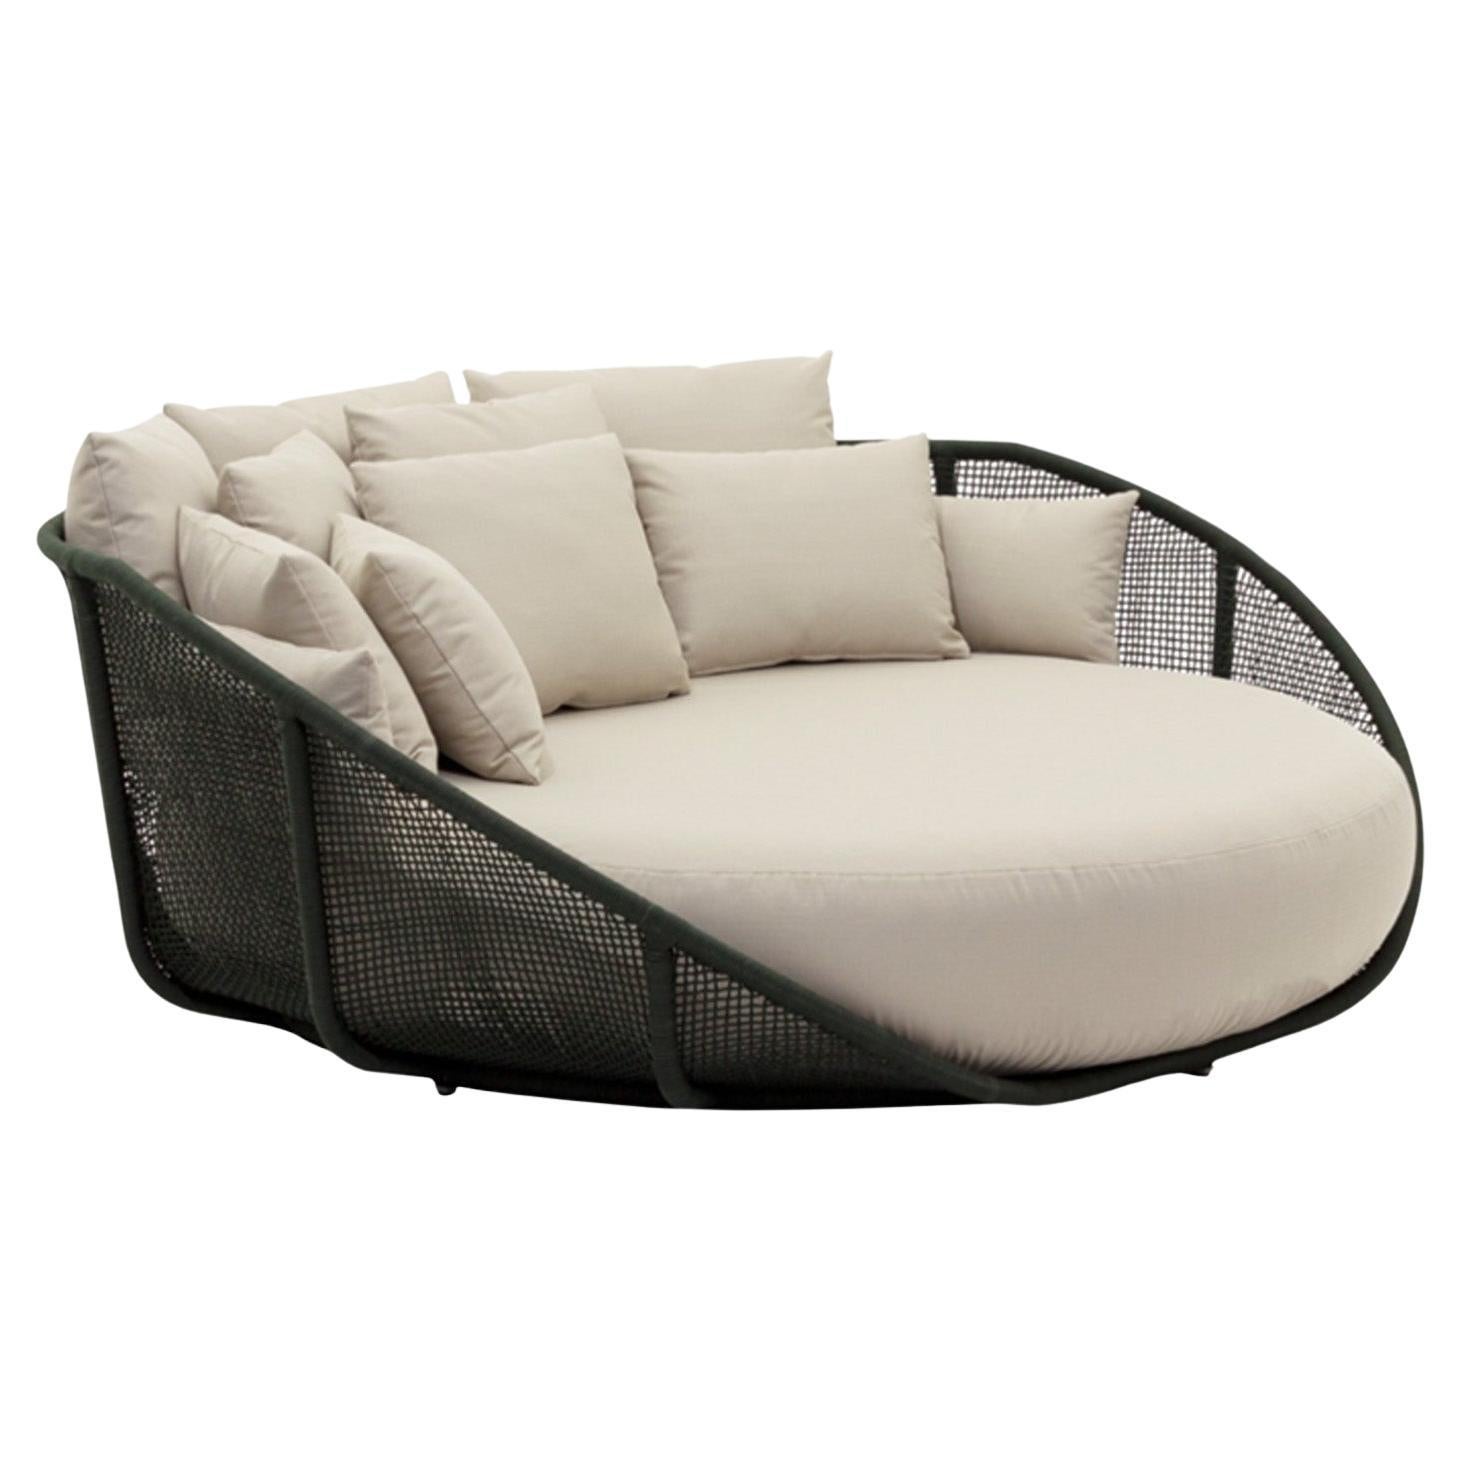 Butterfly Couch For Sale